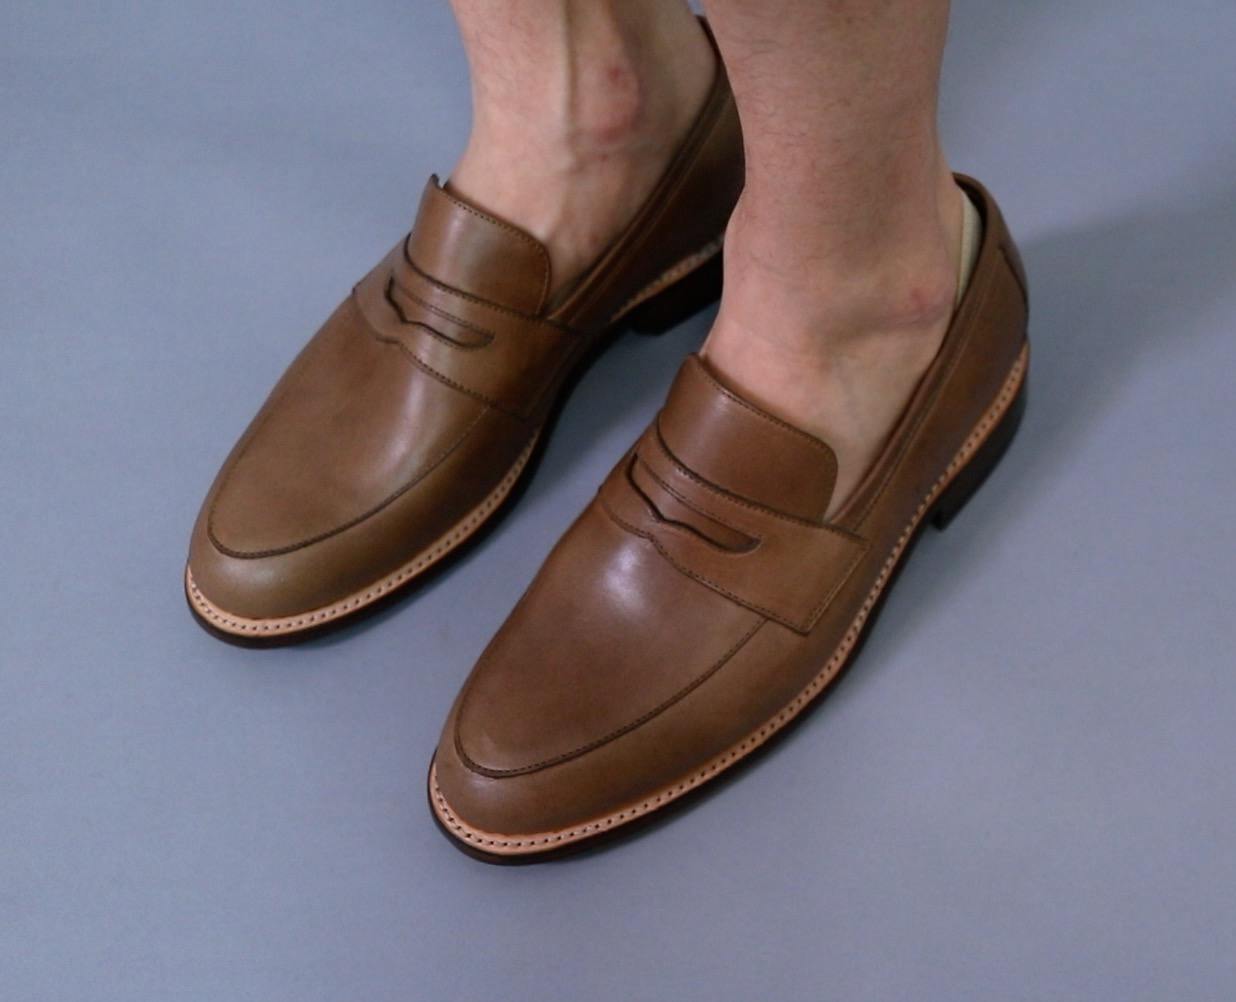 6 Best Shoes to Wear - The Modest Man